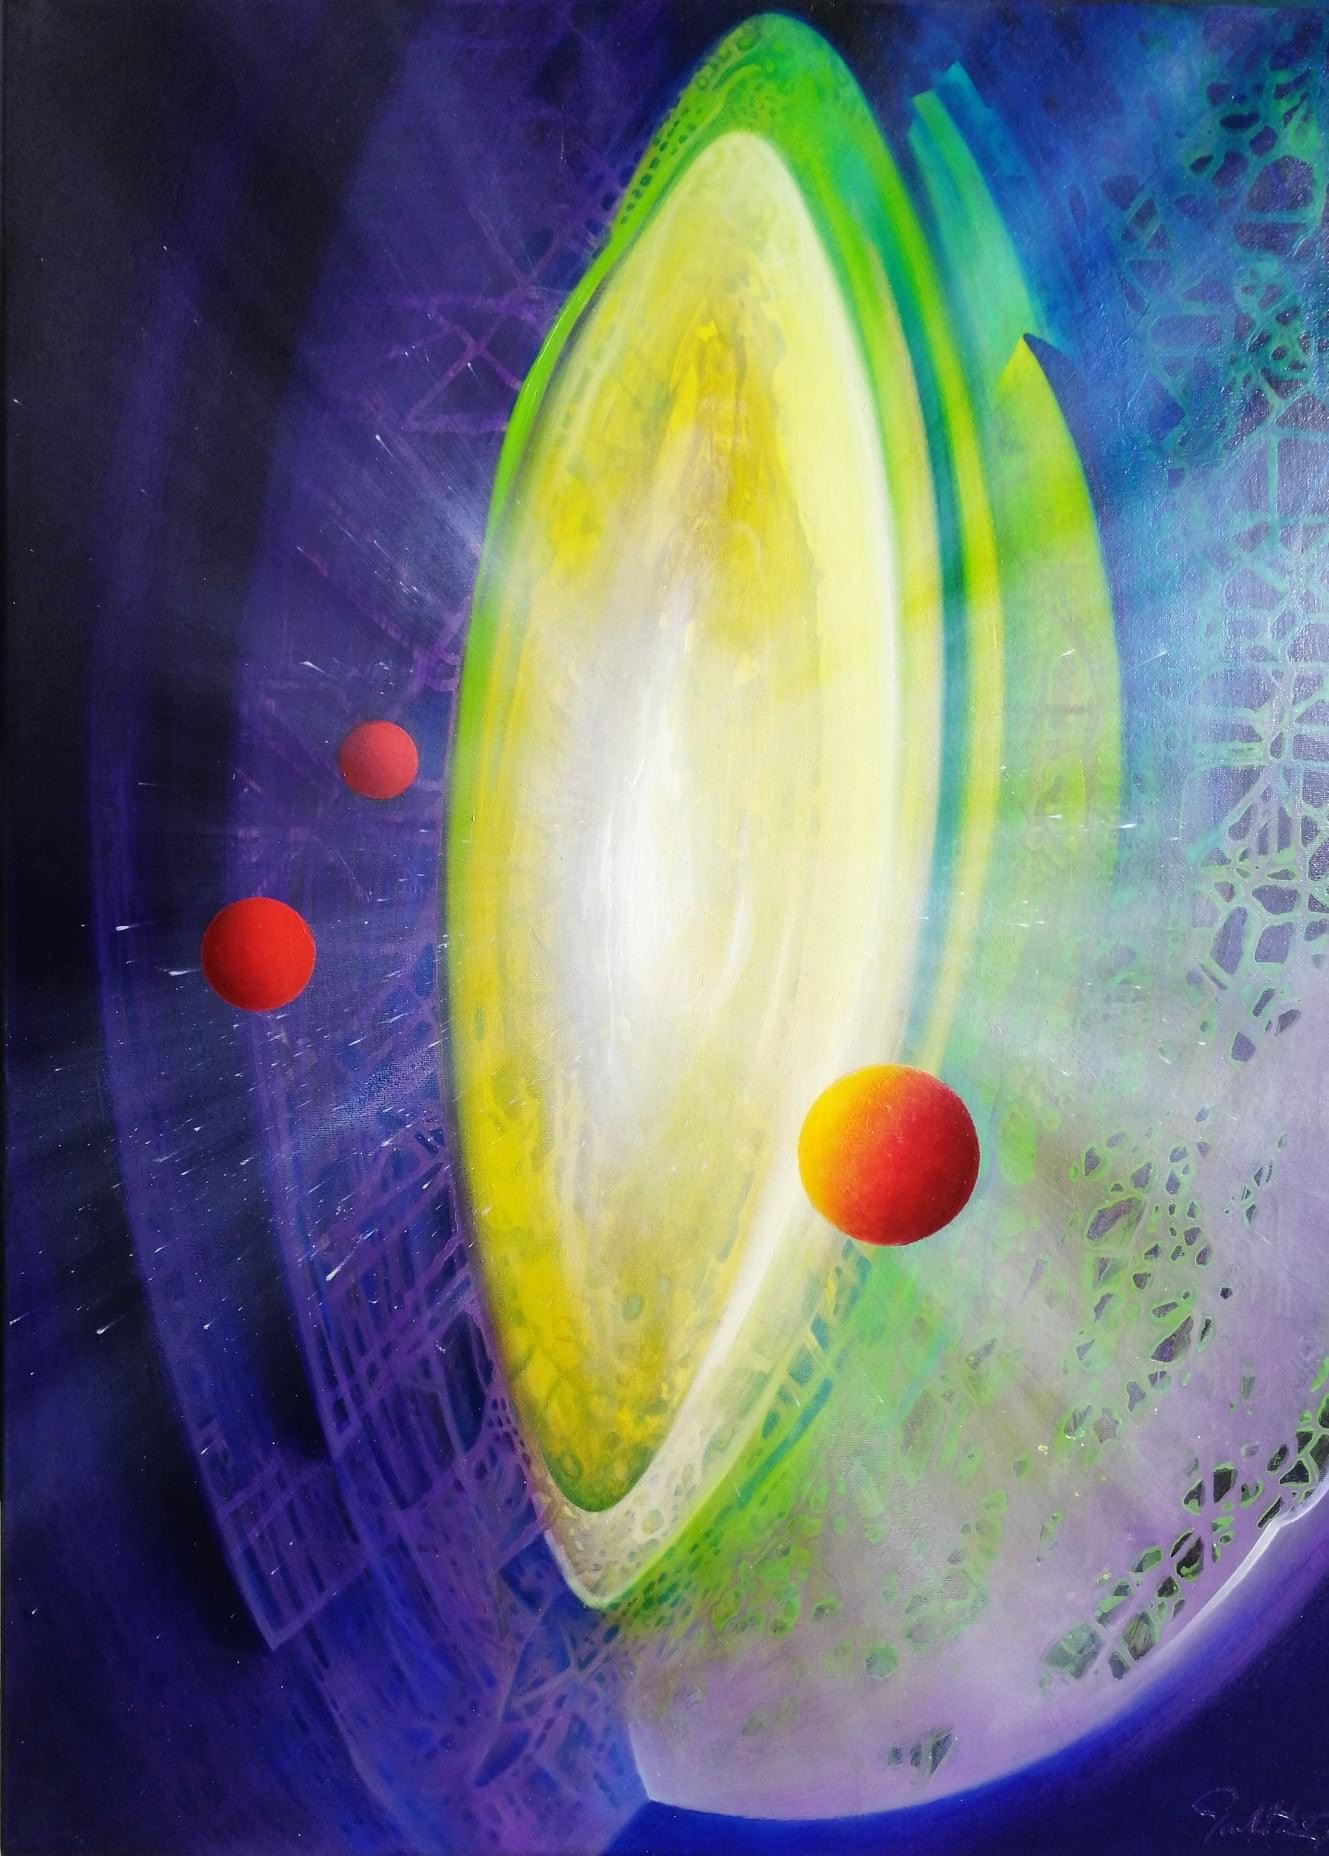 SPHERE TR (tension~relaxation) * oil on canvas * 80 x 60 cm * MMXX